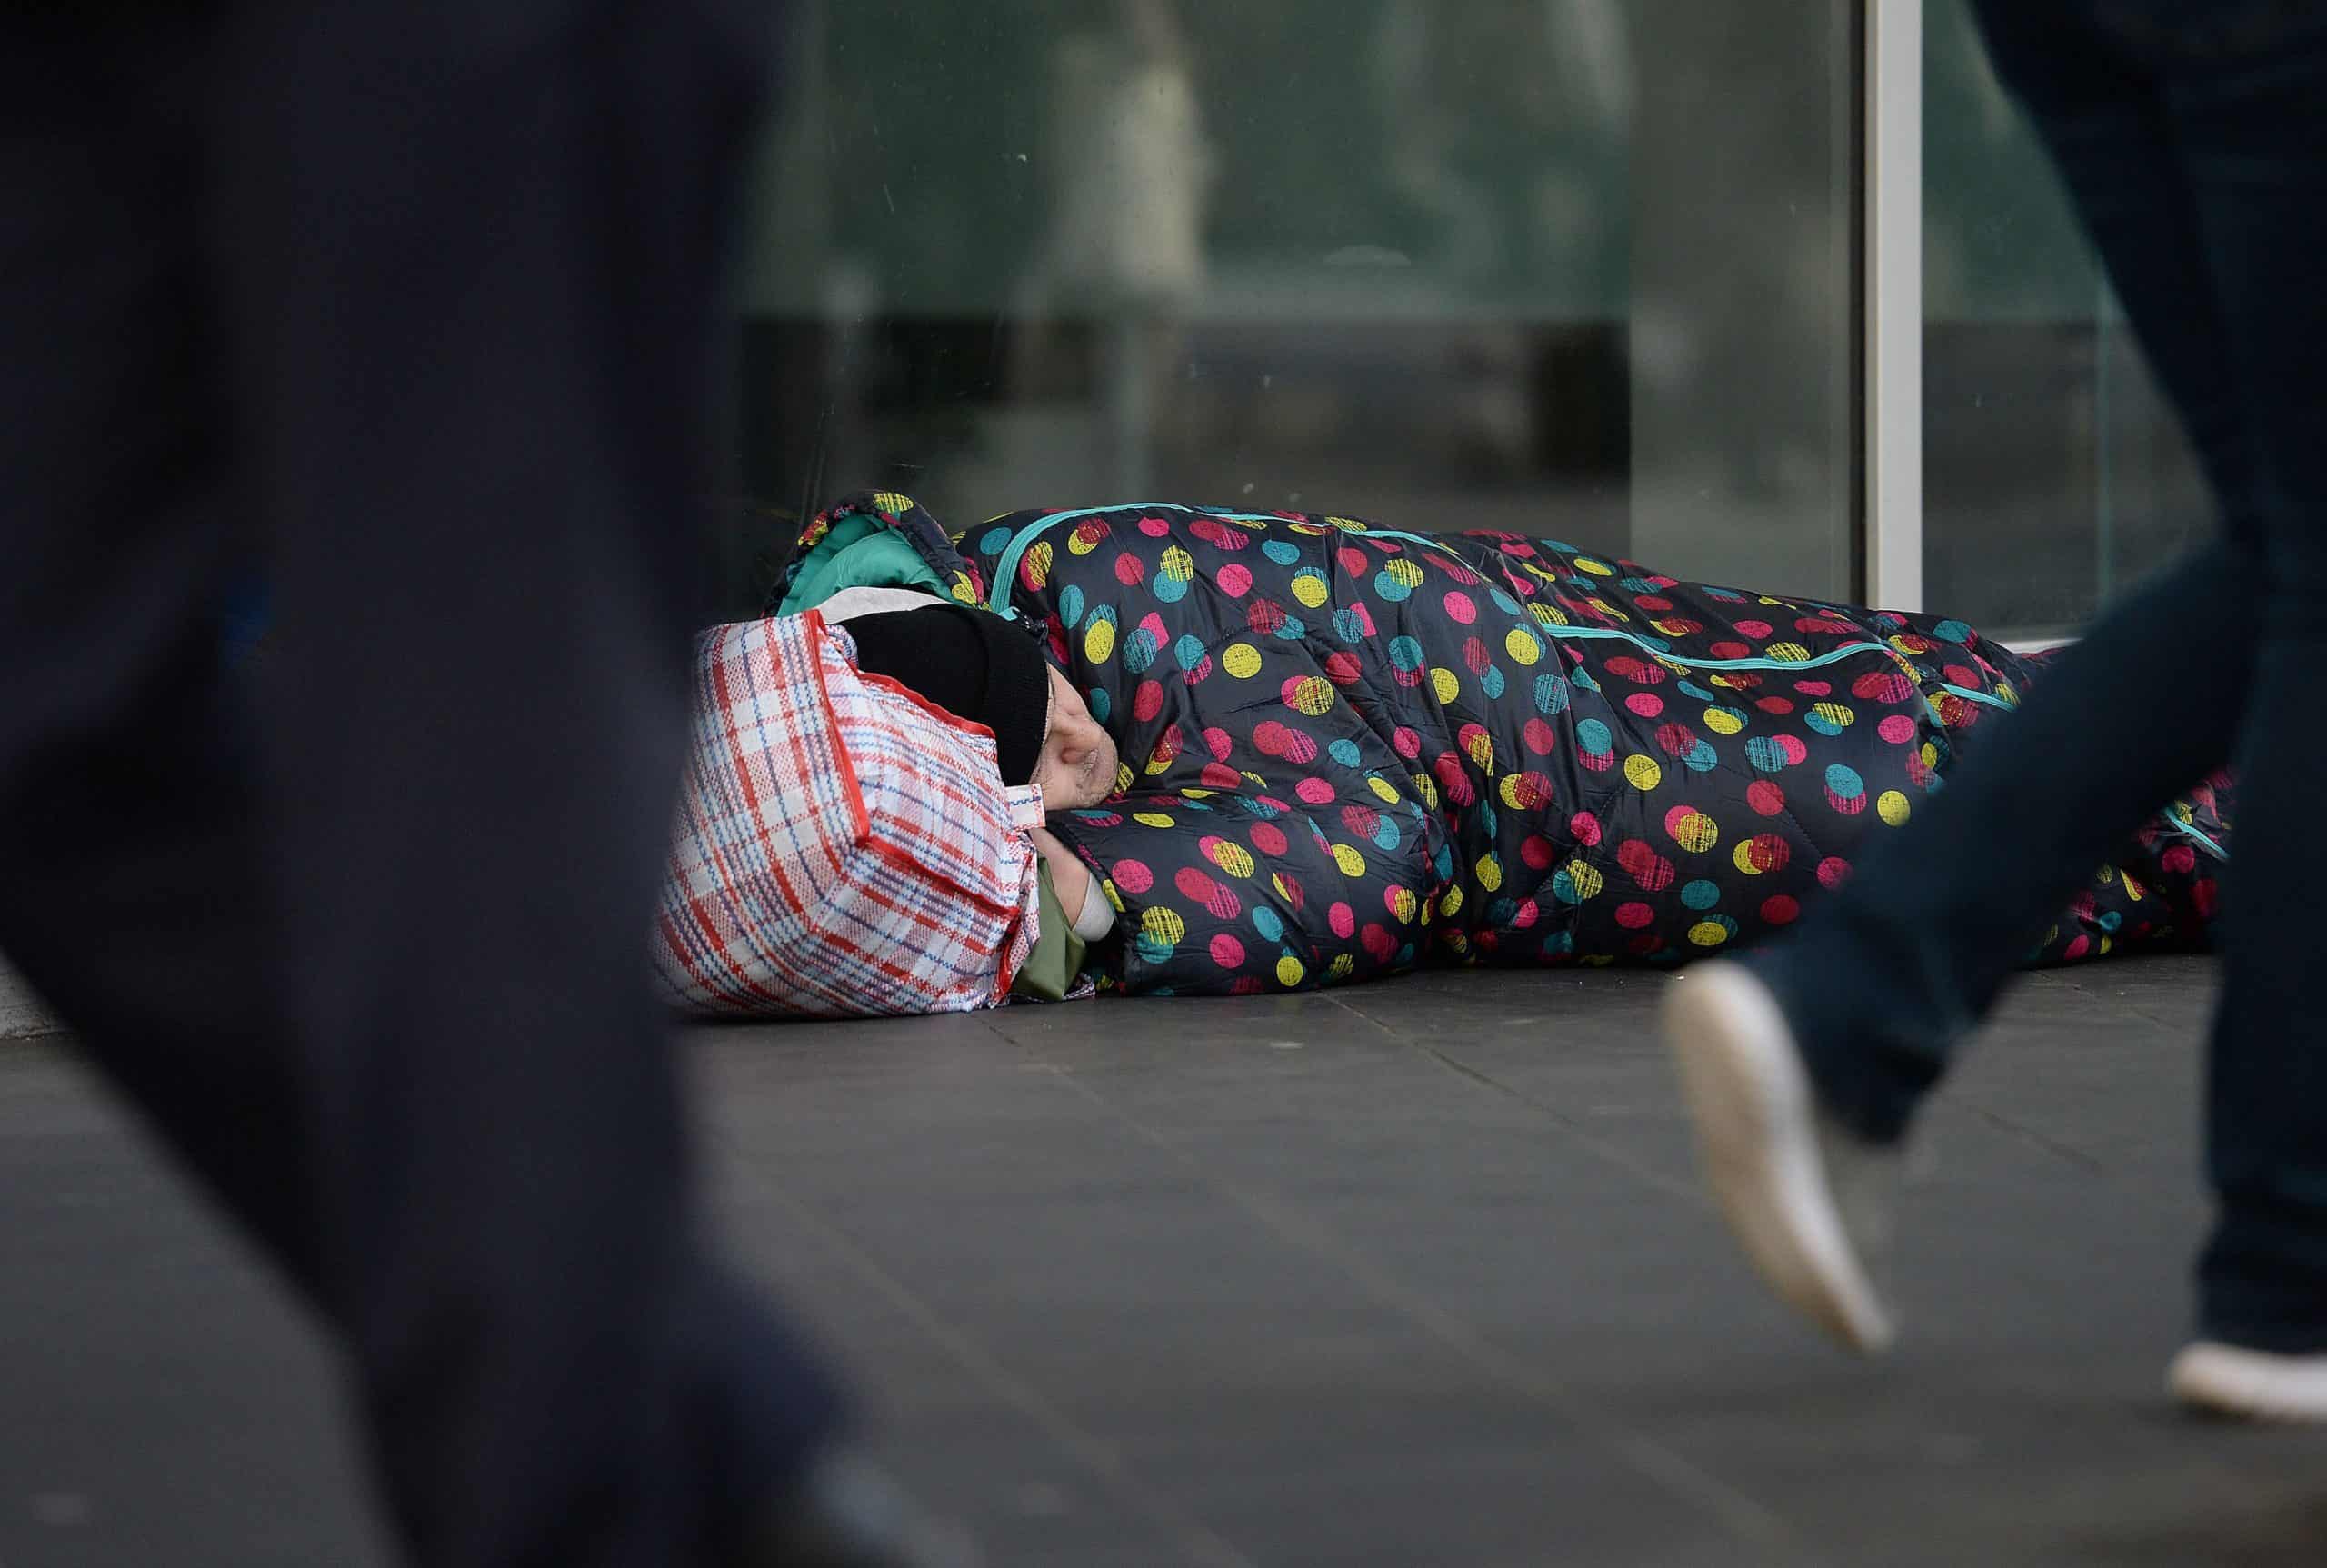 English councils’ spending on homeless B&B housing up 500% in decade